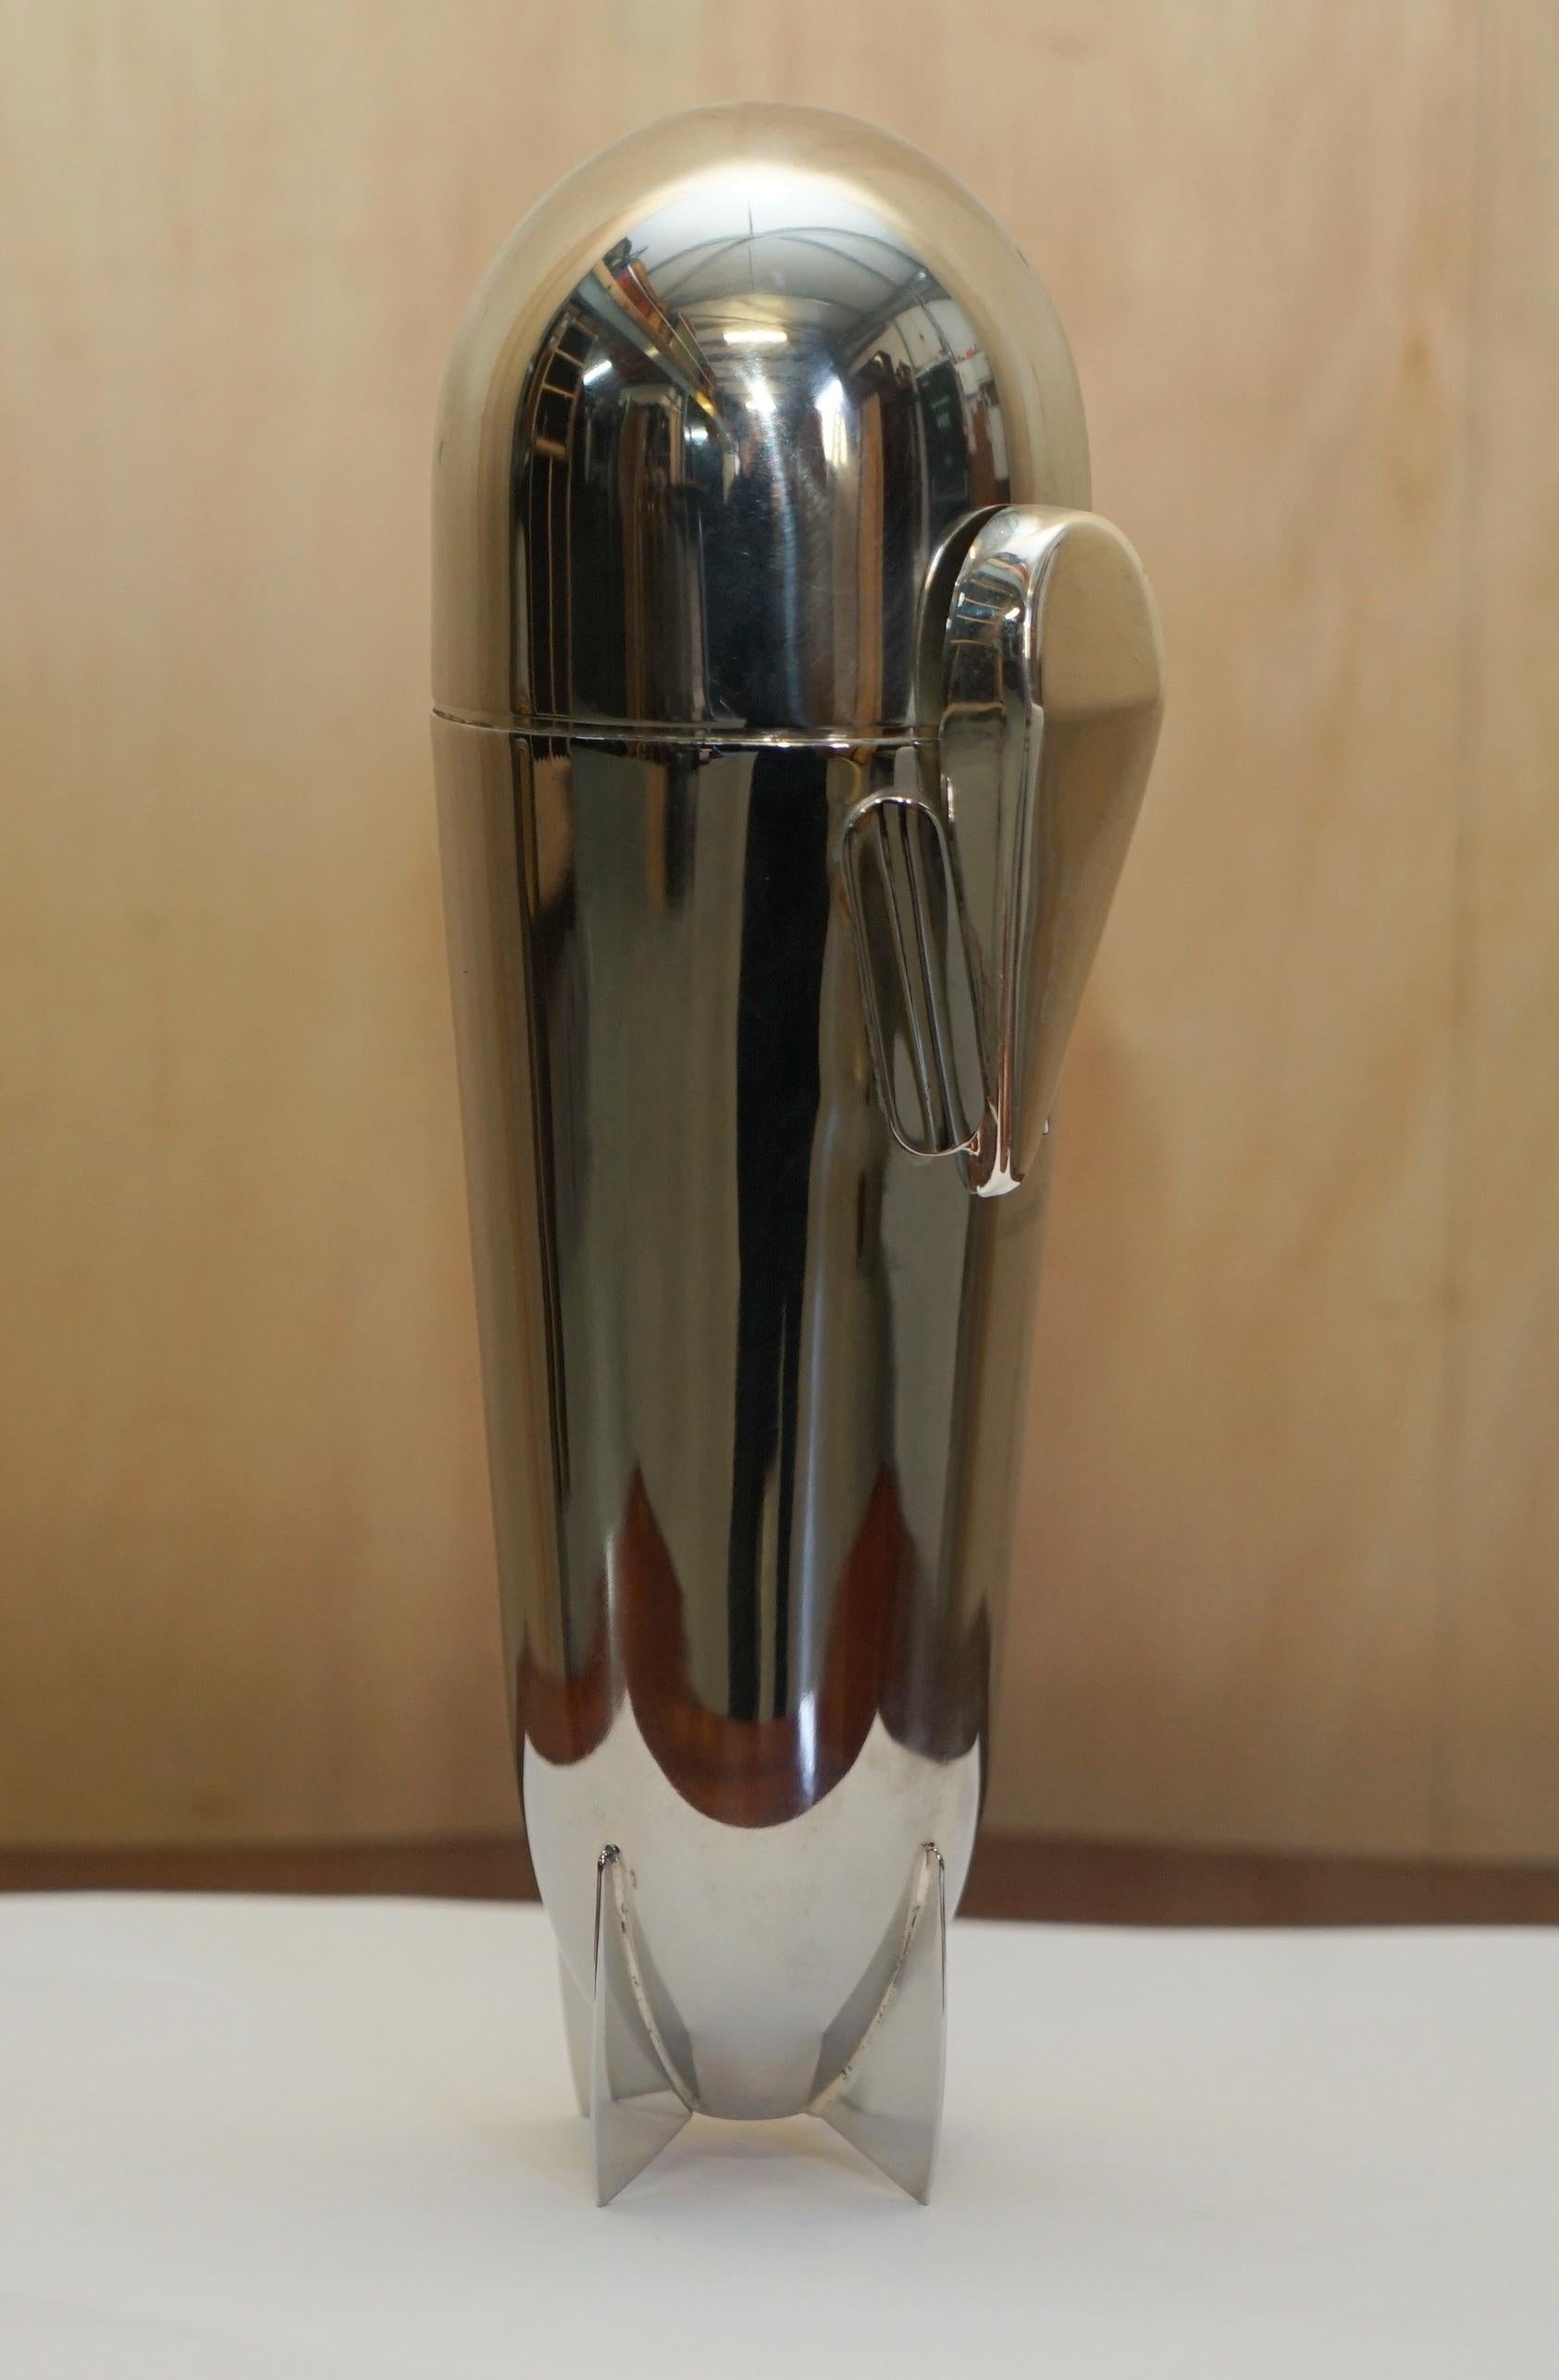 We are delighted to offer for sale this stunning, circa 1960's Atomic Era Art Deco style Zeppelin cocktail shaker. 

A good looking and well made piece, these were made originally for the London elite in the swinging 1920's who were all things bling